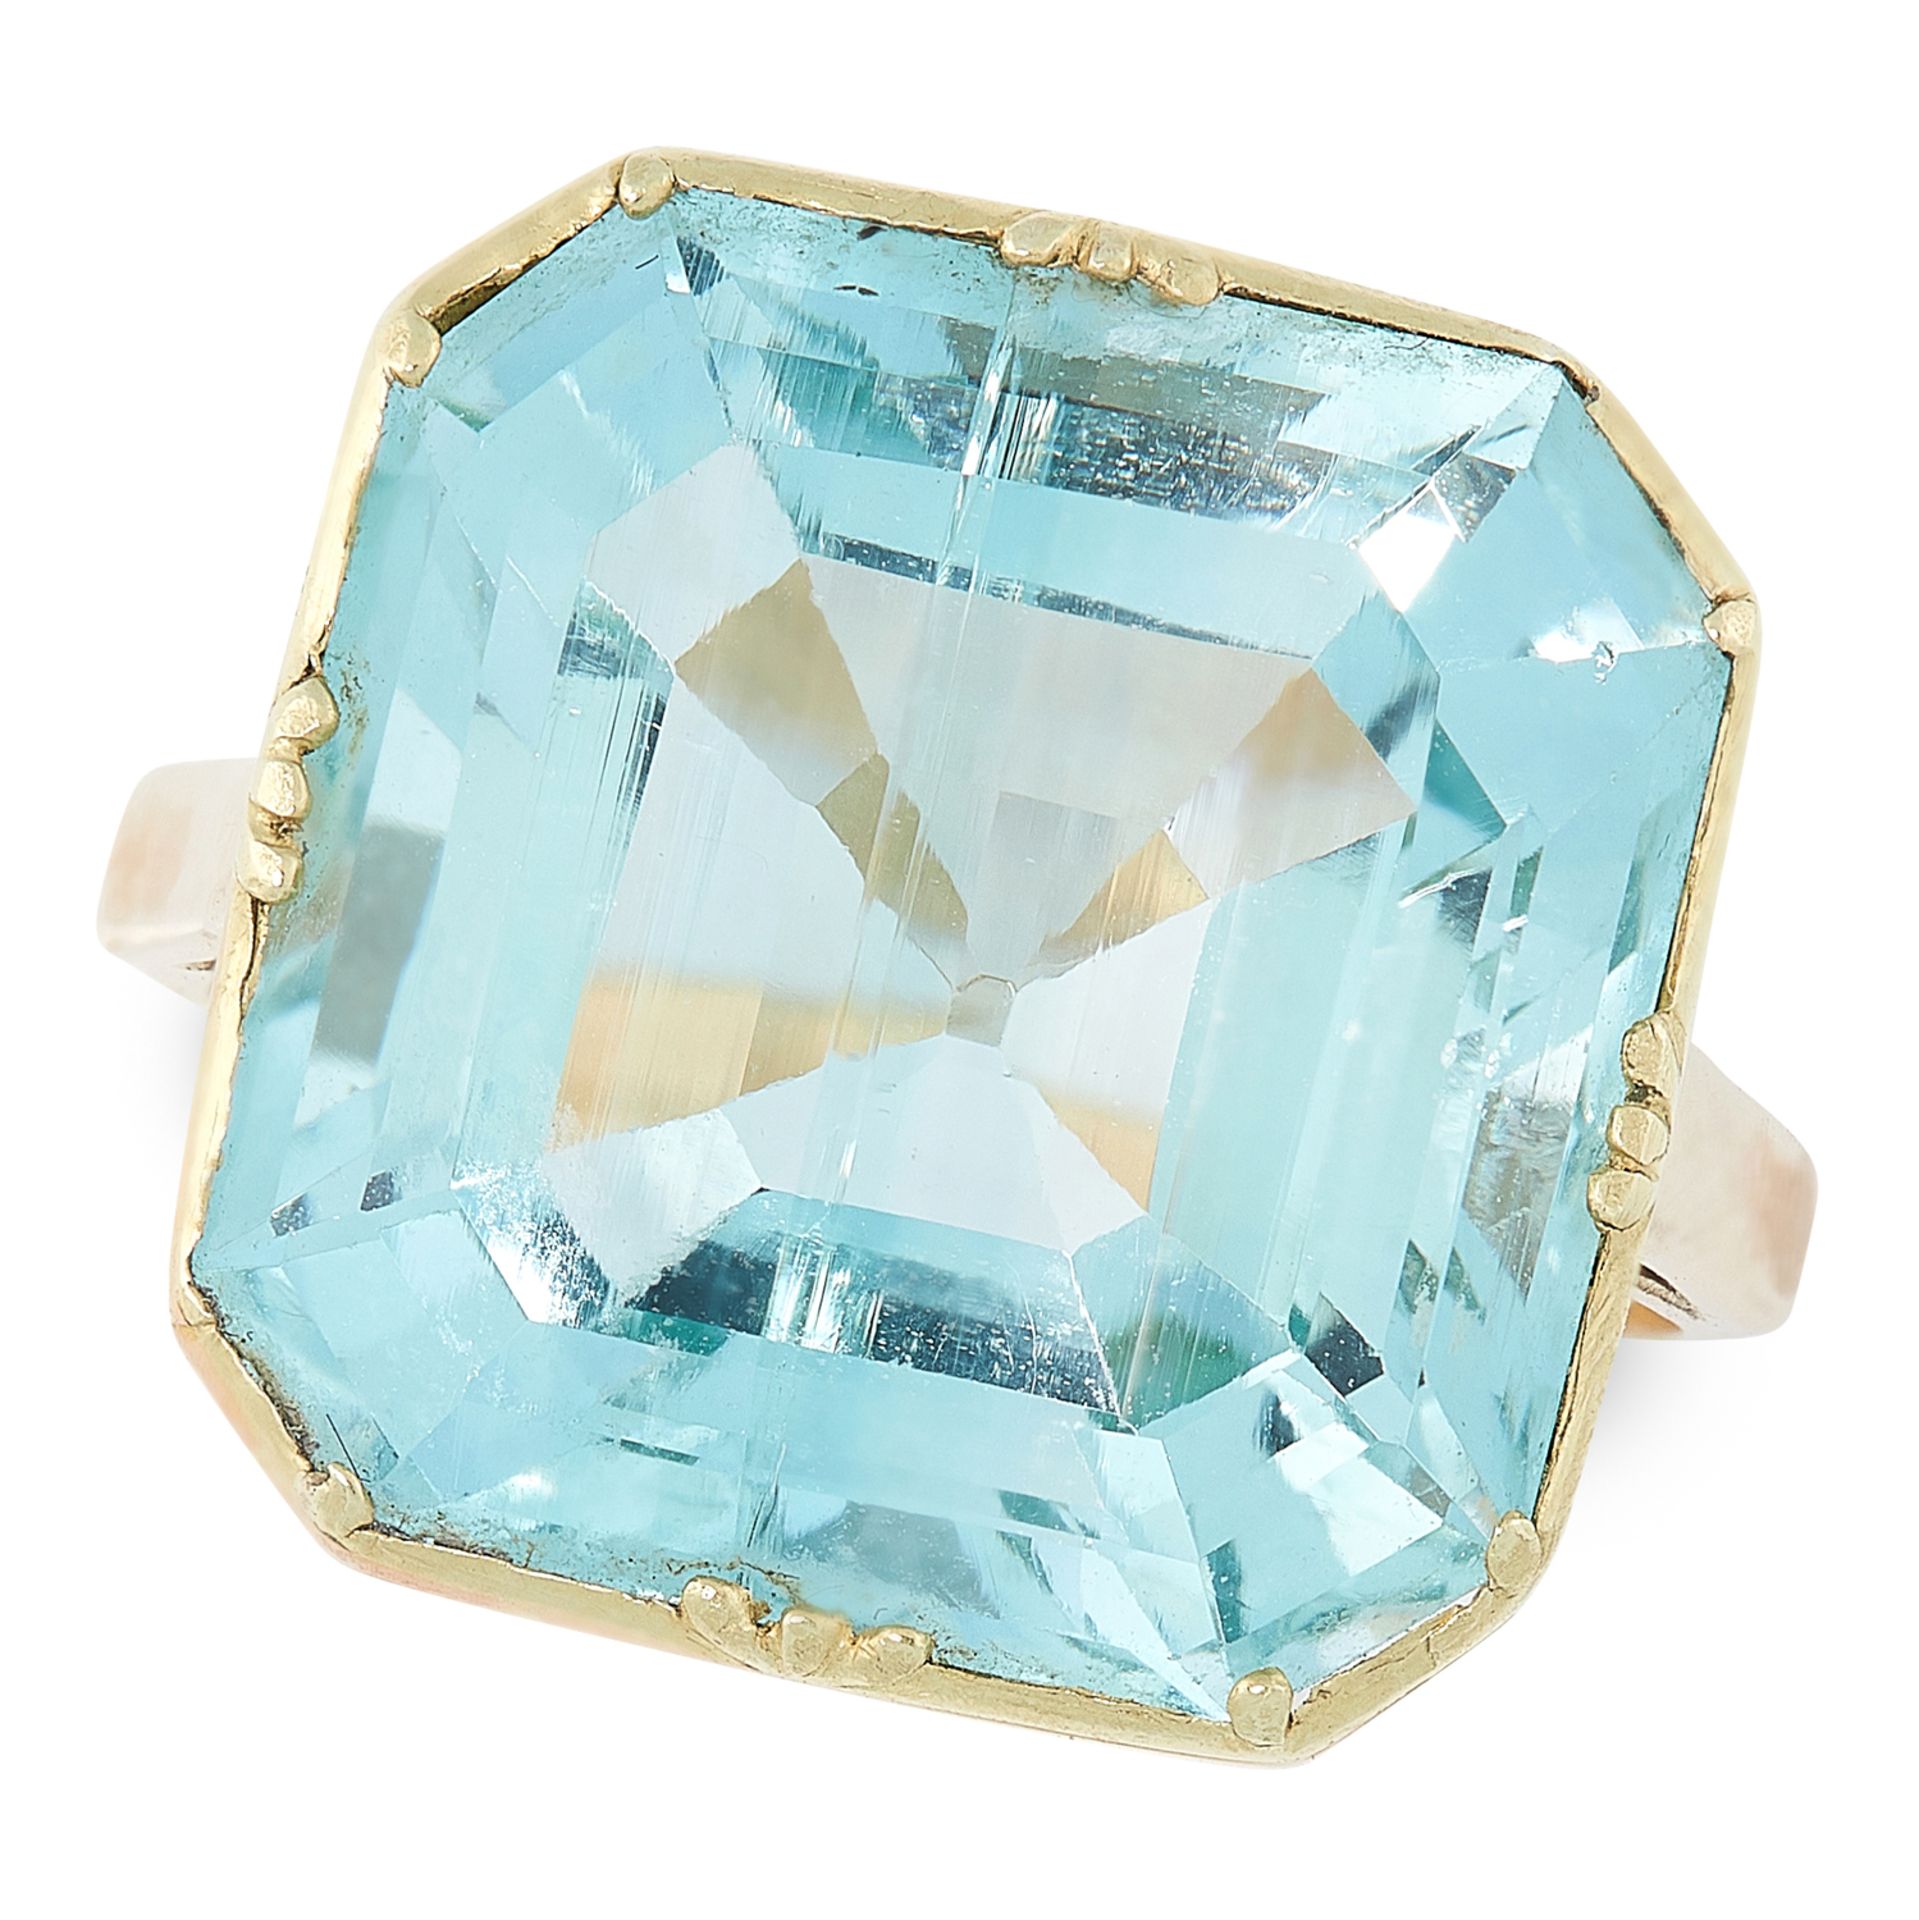 AN AQUAMARINE DRESS RING in yellow gold, set with an emerald cut aquamarine of 14.38 carats, stamped